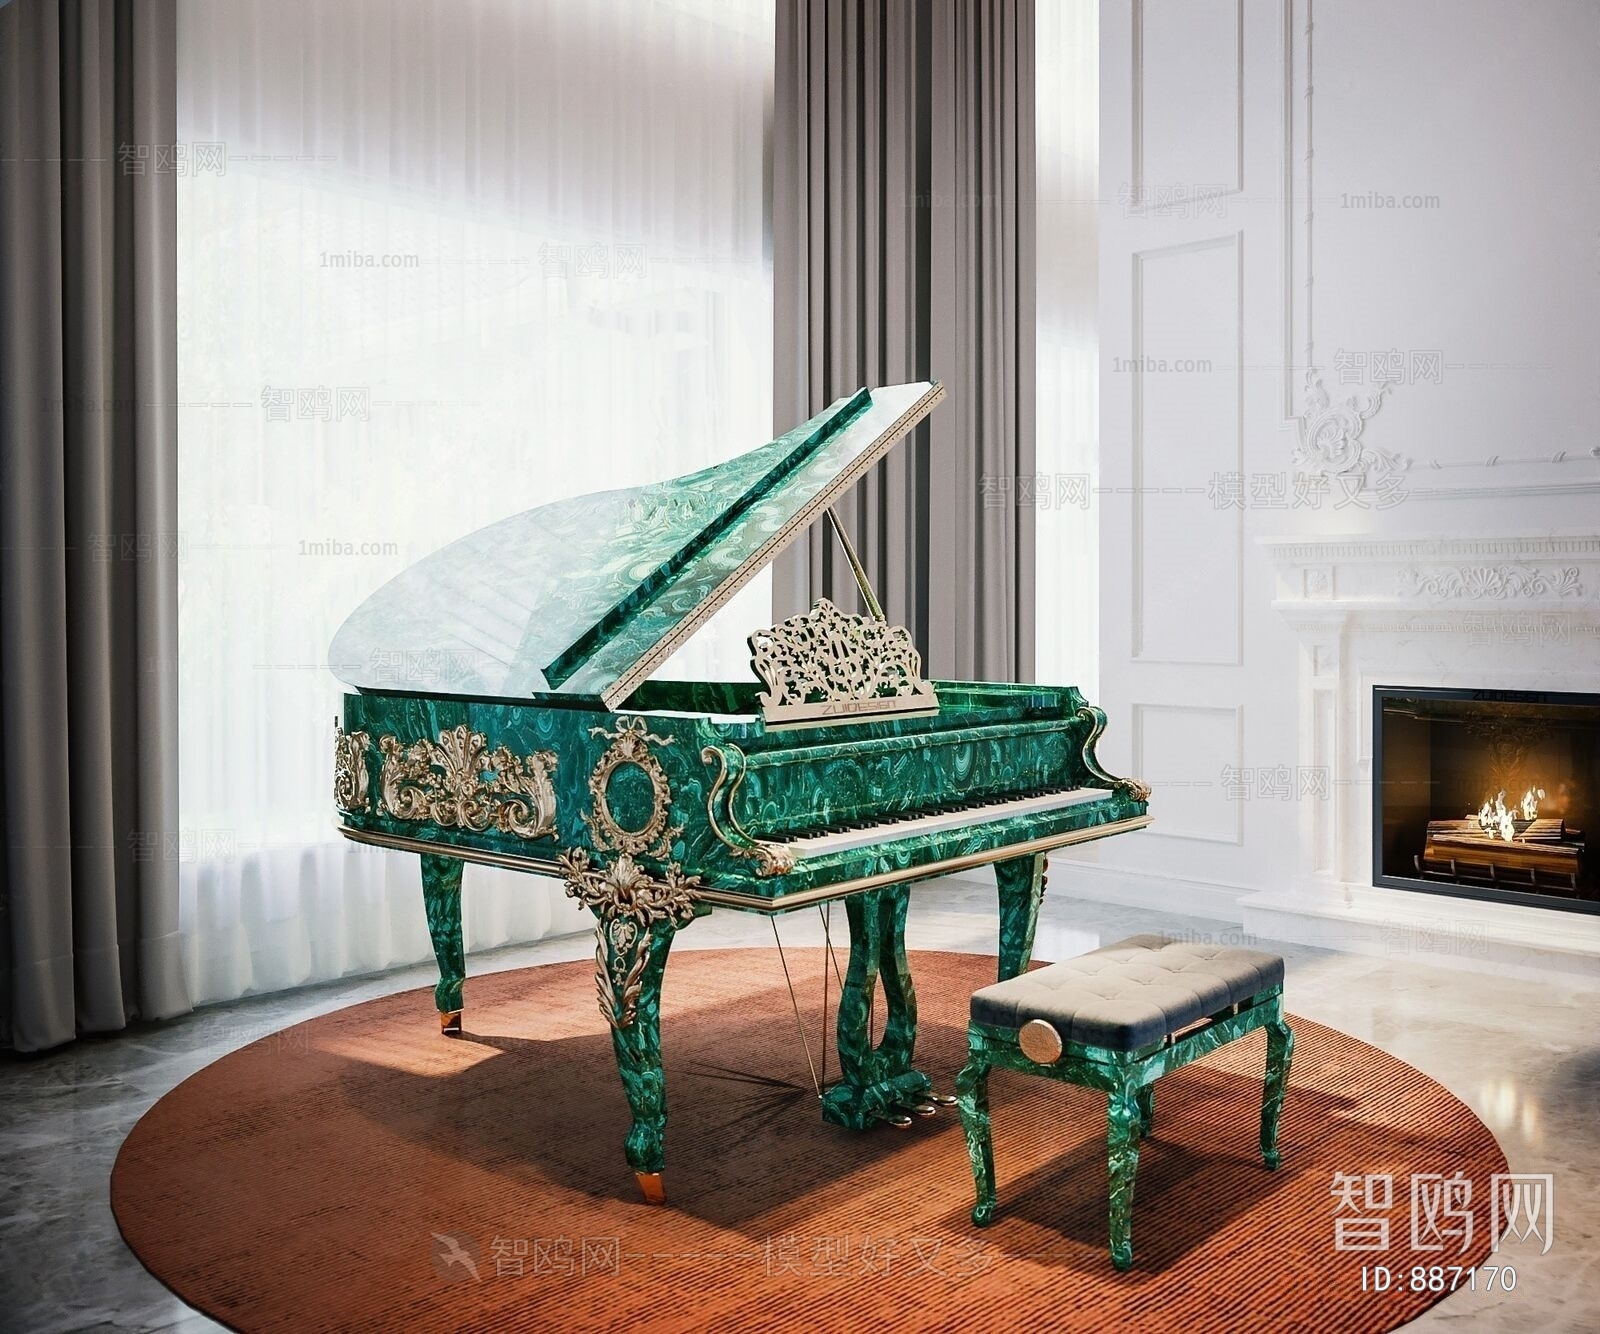 Classical Style Piano